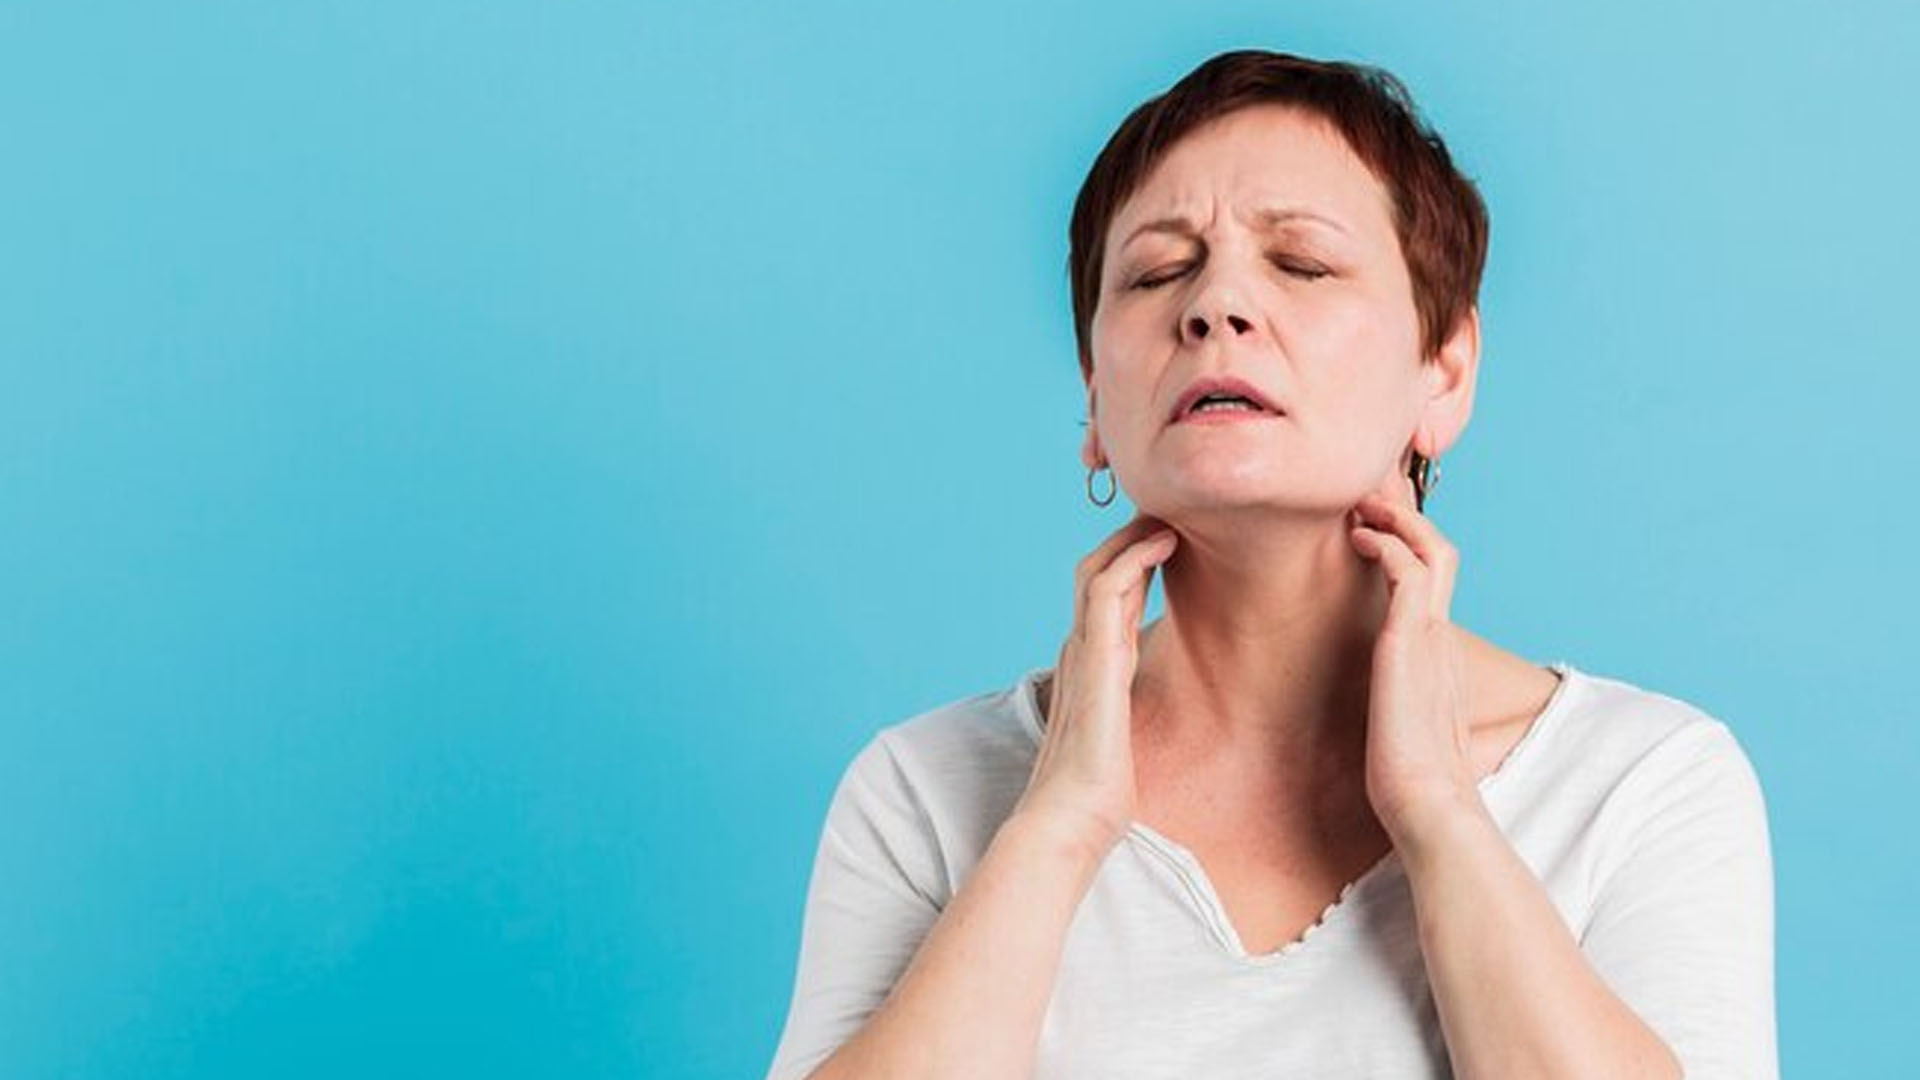 What are the Home Remedies for Dry Throat?